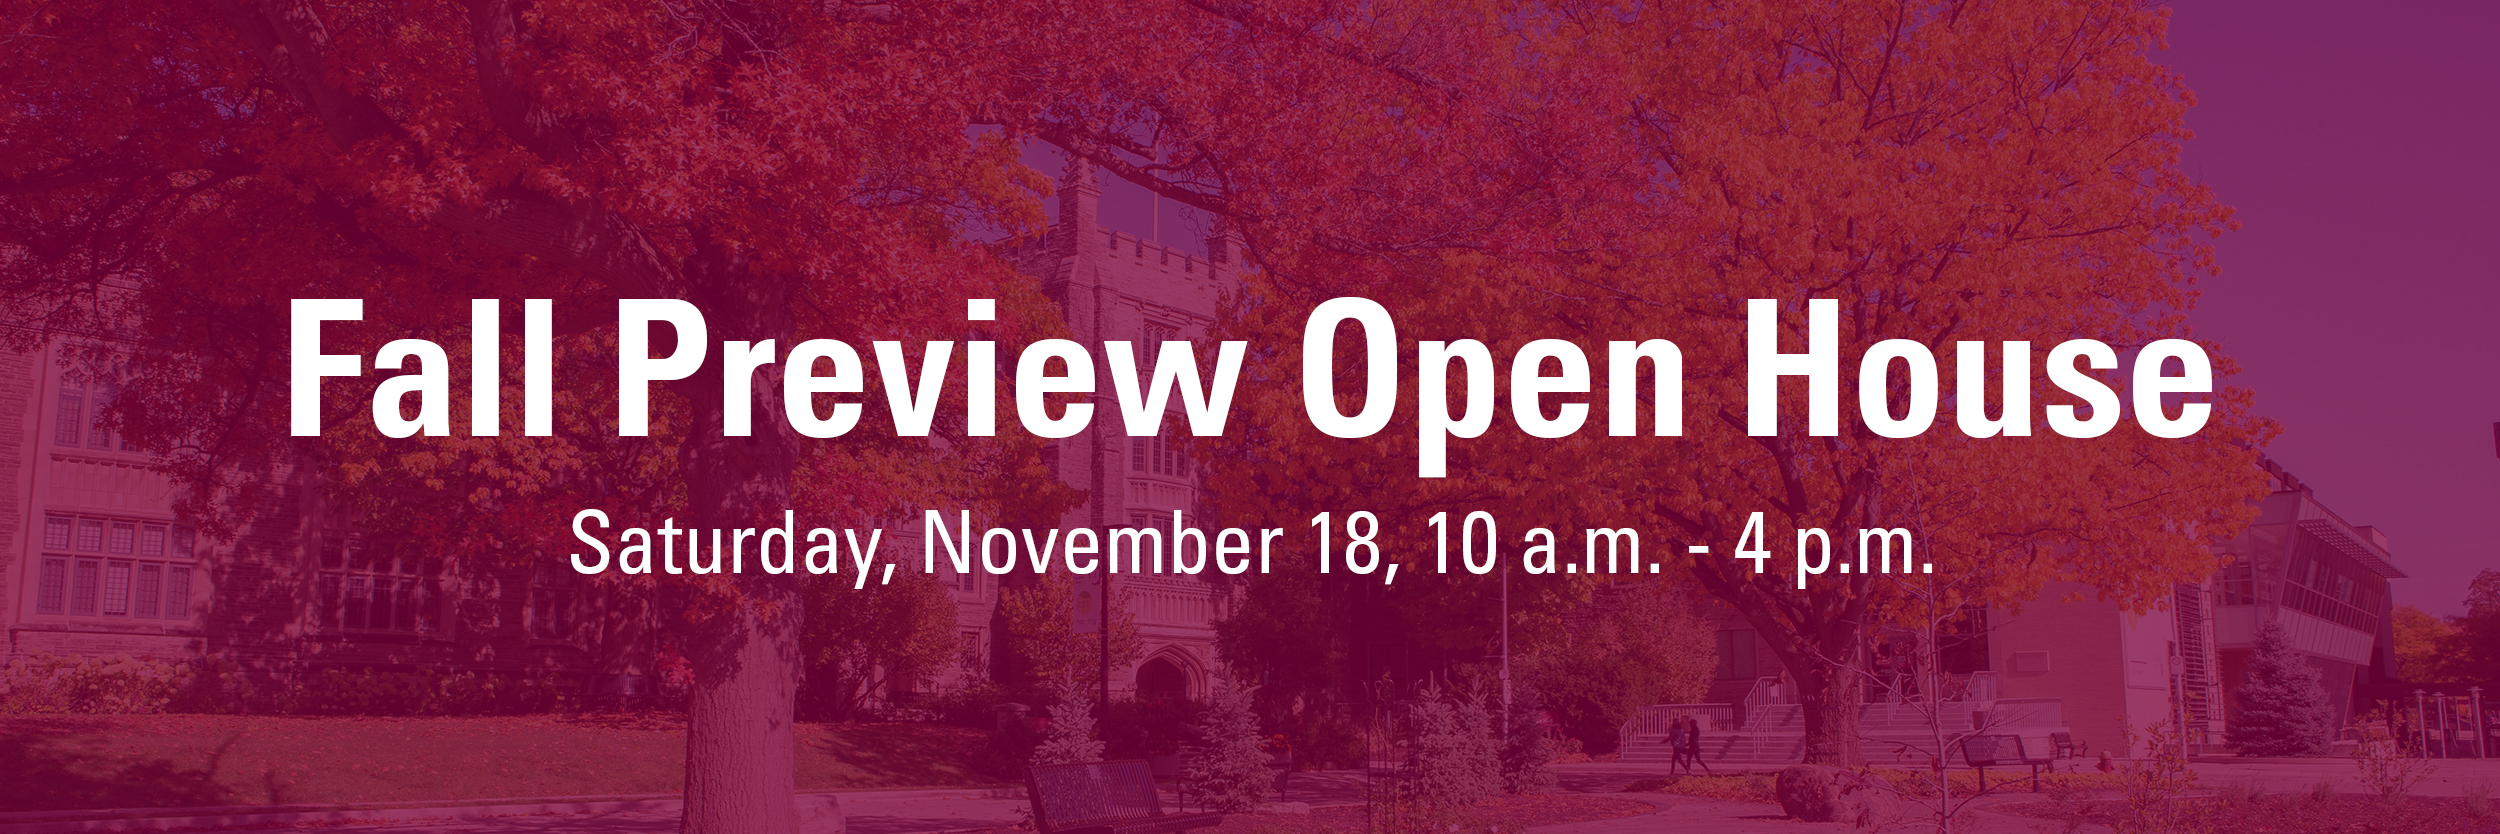 A graphic of the Fall Preview open house happening on Saturday November 18 from 10 am to 4 pm.